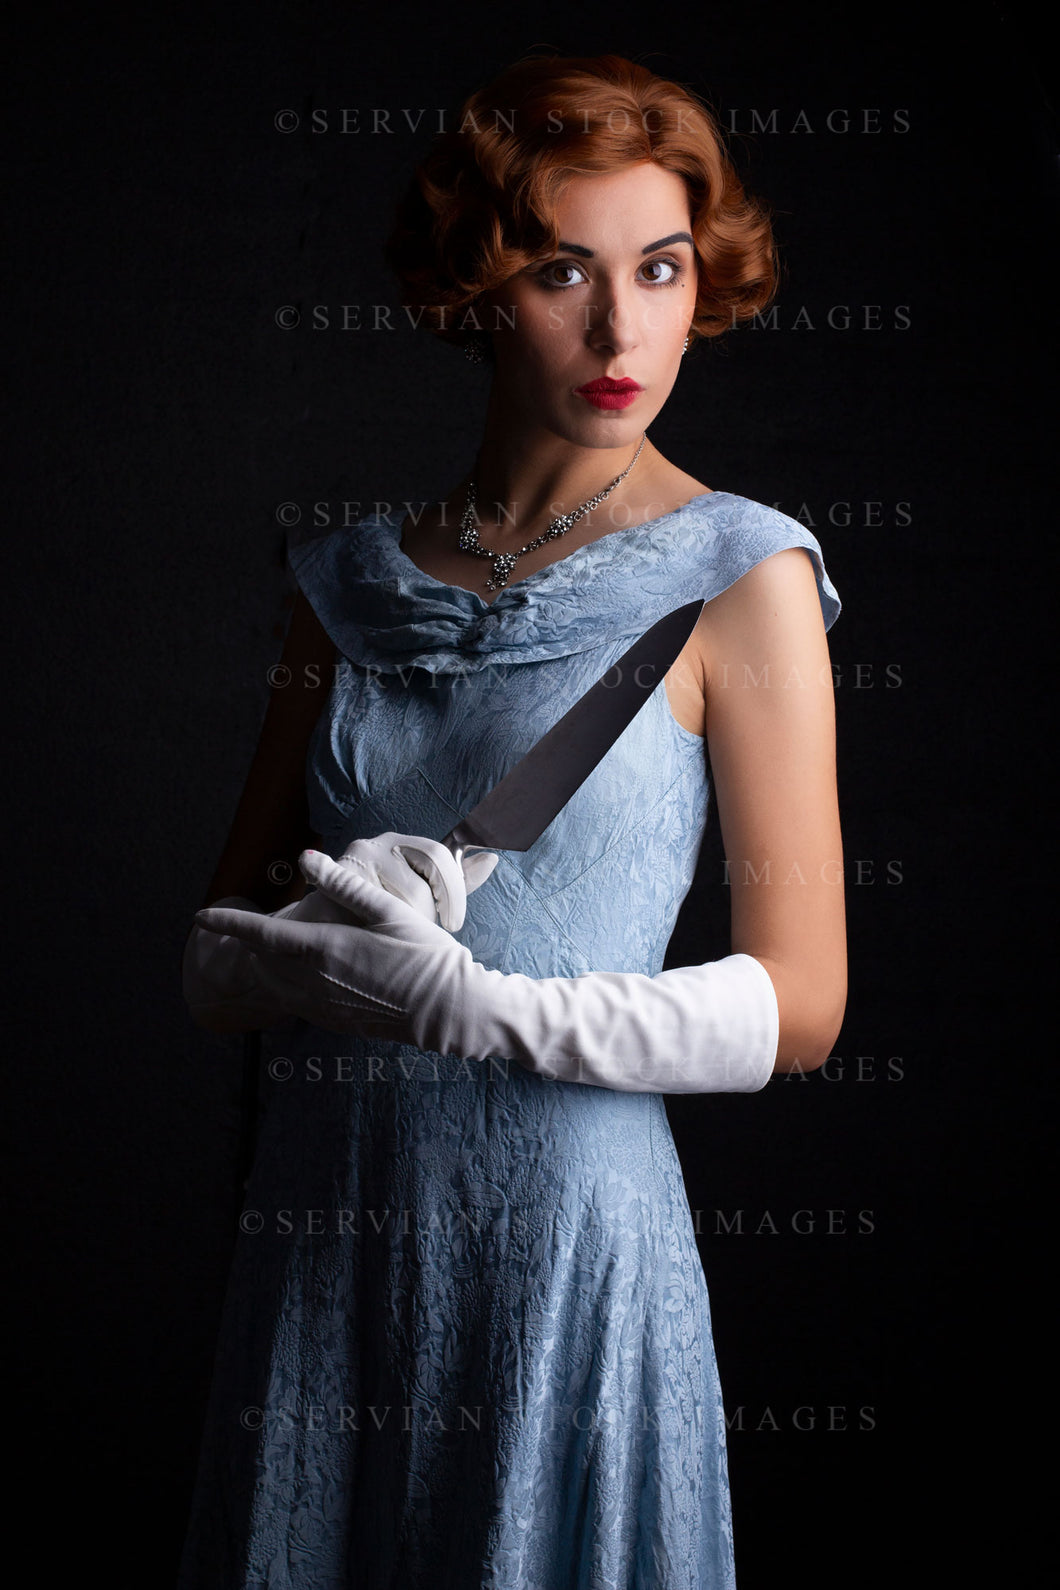 1930s woman wearing a blue vintage dress, long white gloves, and a diamante necklace. She's holding a large kitchen knife against a black backdrop.(Sarah 0254)